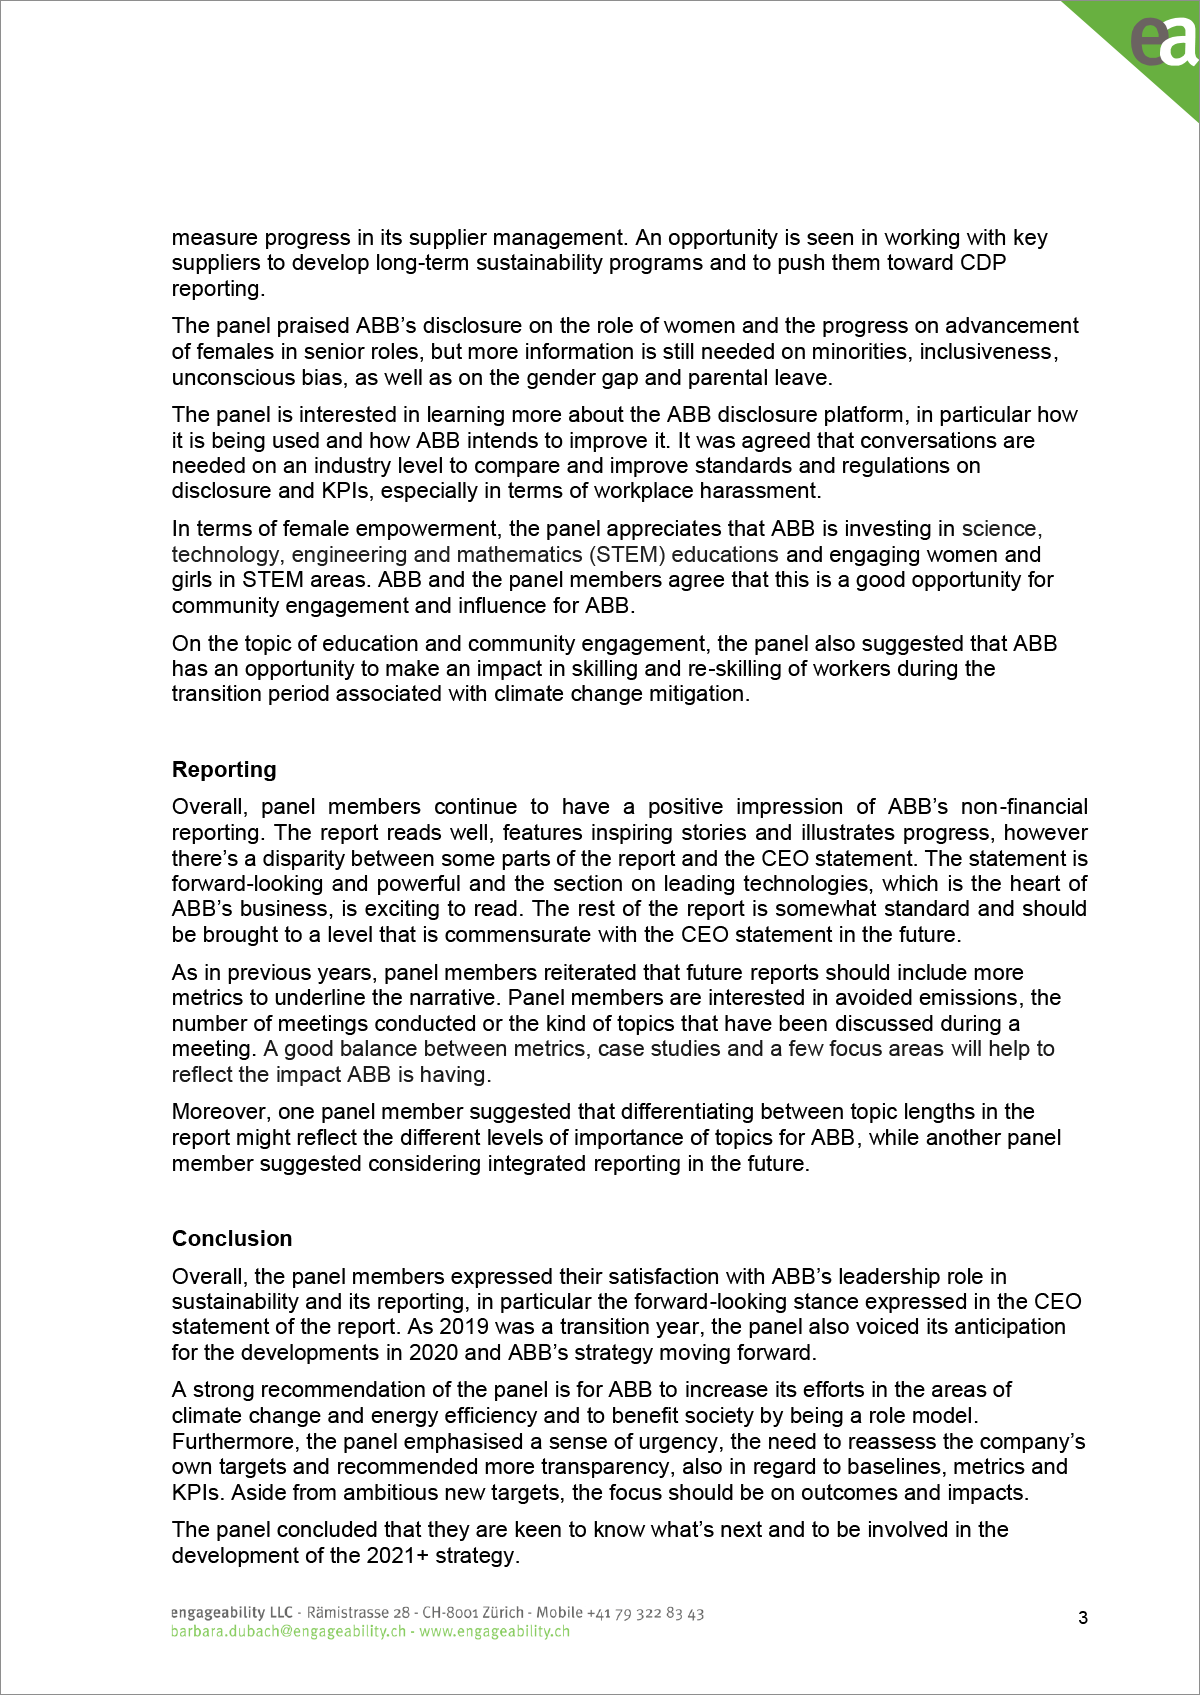 ABB Stakeholder Panel statement – page 3 of 3 (document)